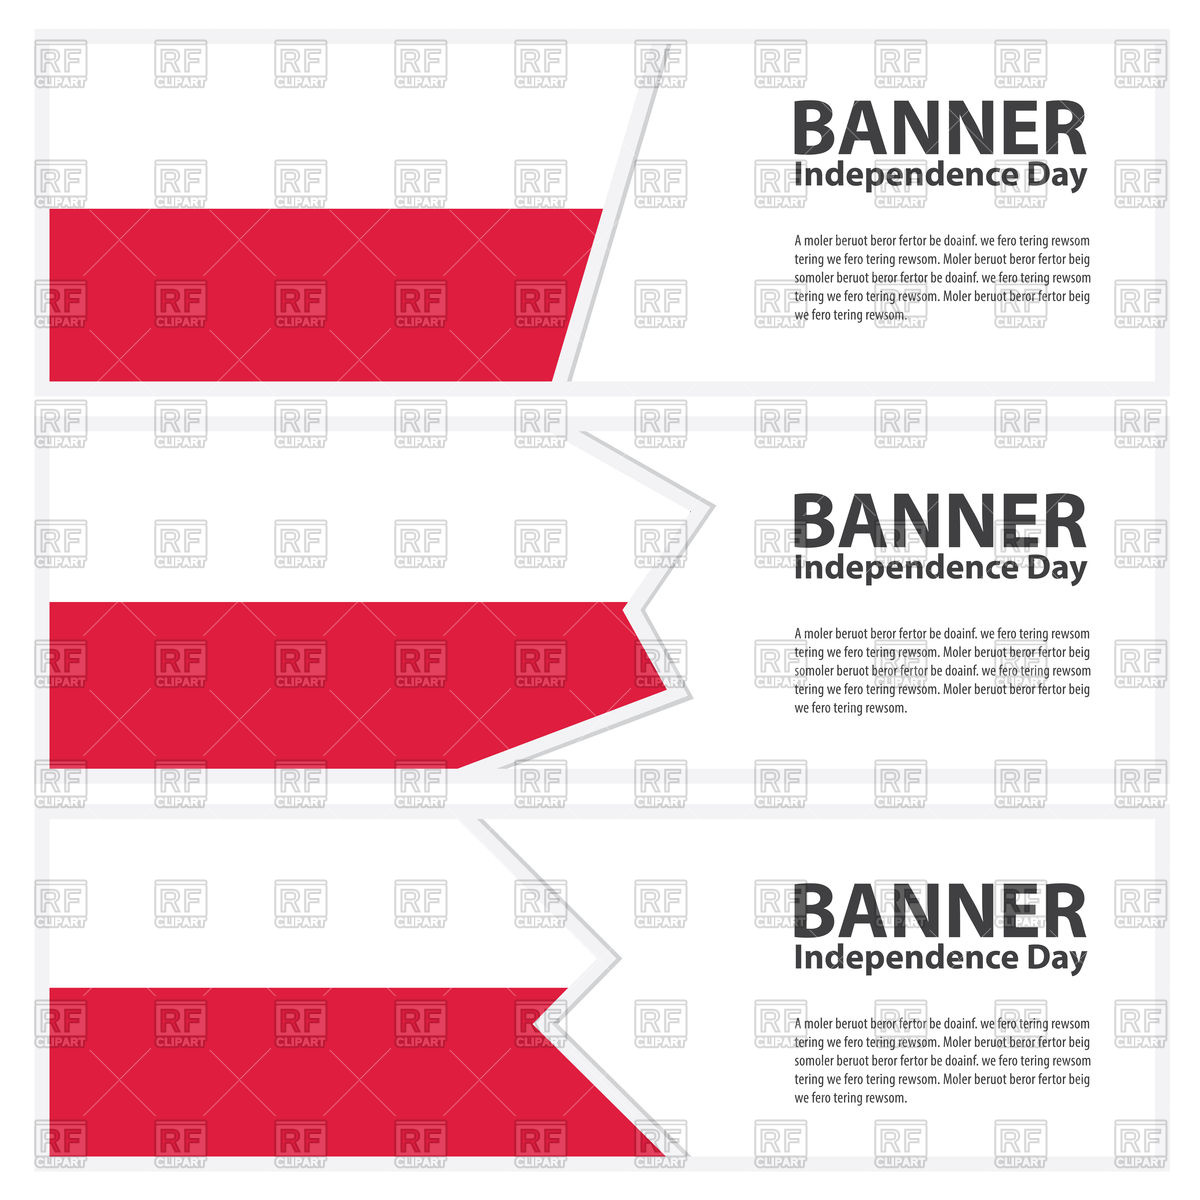 Poland Flag Banners 88900 Download Royalty Free Vector Clipart  Eps